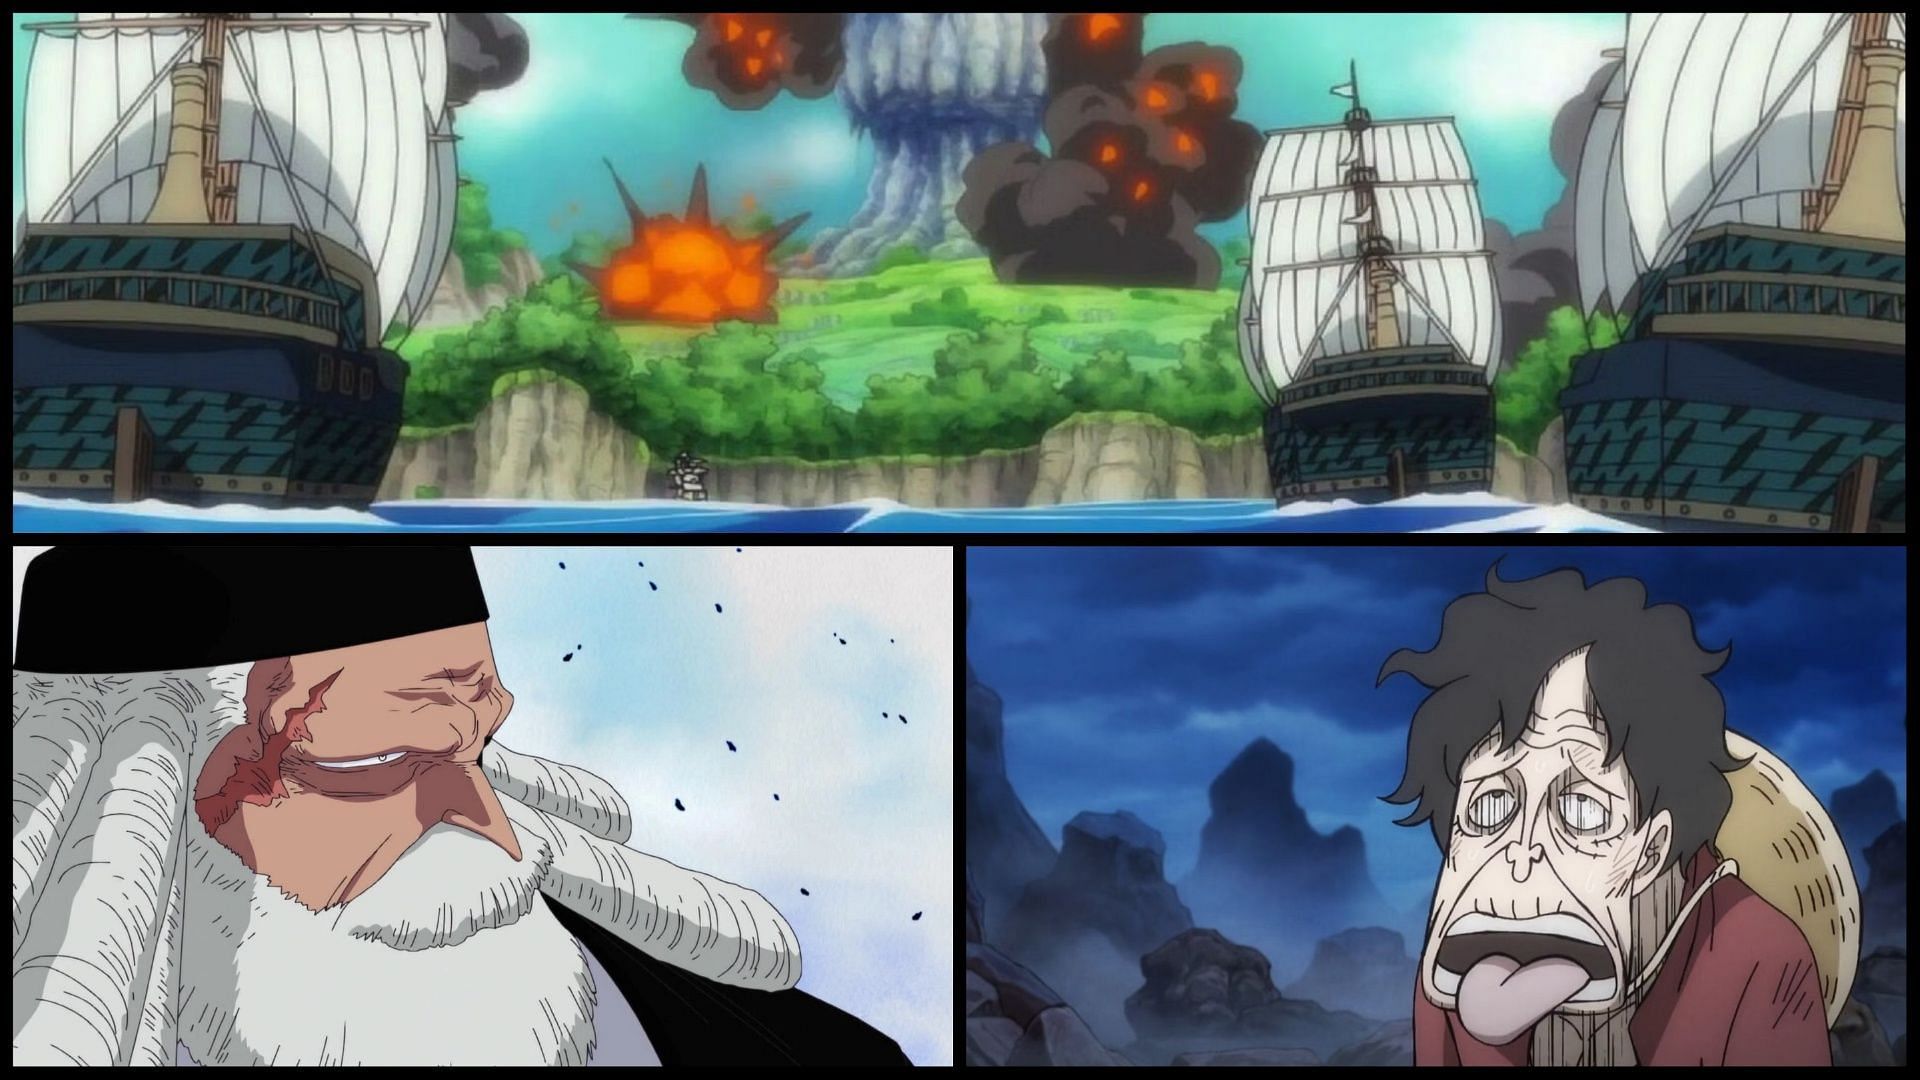 Chaos breaks out on Egghead Island in One Piece chapter 1104 (Images via Toei Animation)